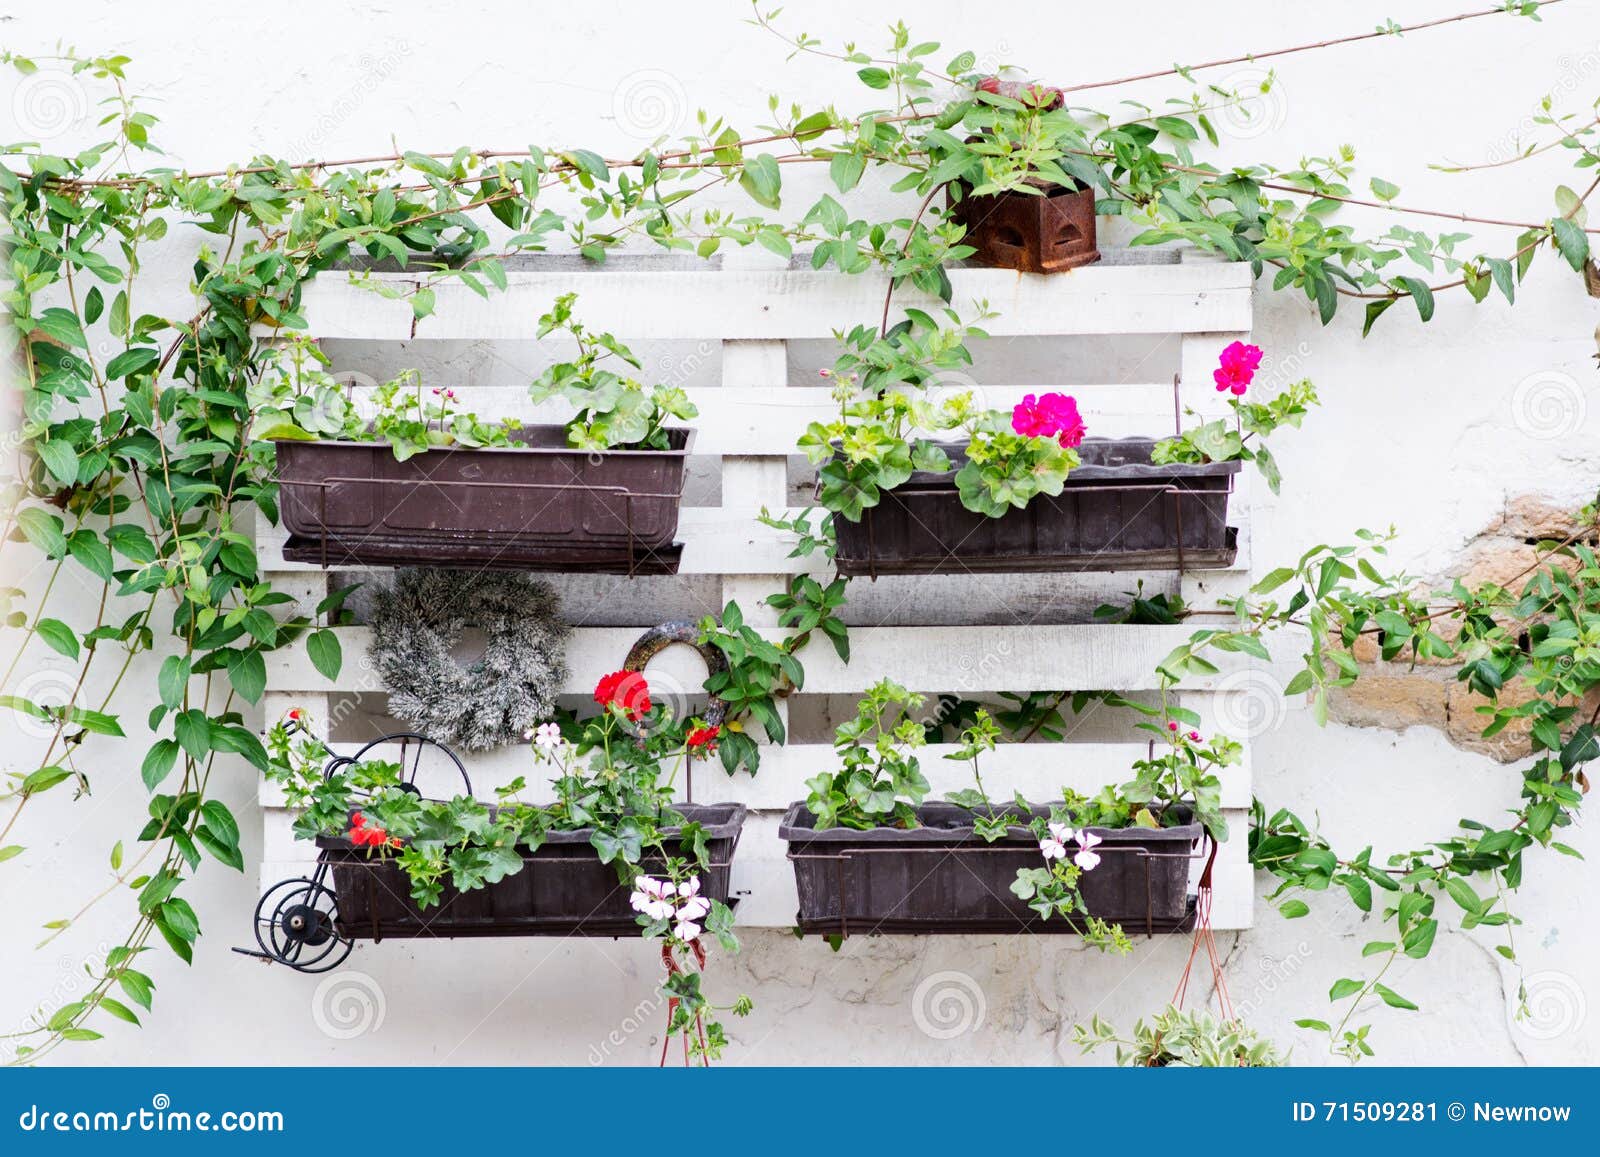 Pallet Ideas For Gardening Stock Image Image Of House 71509281